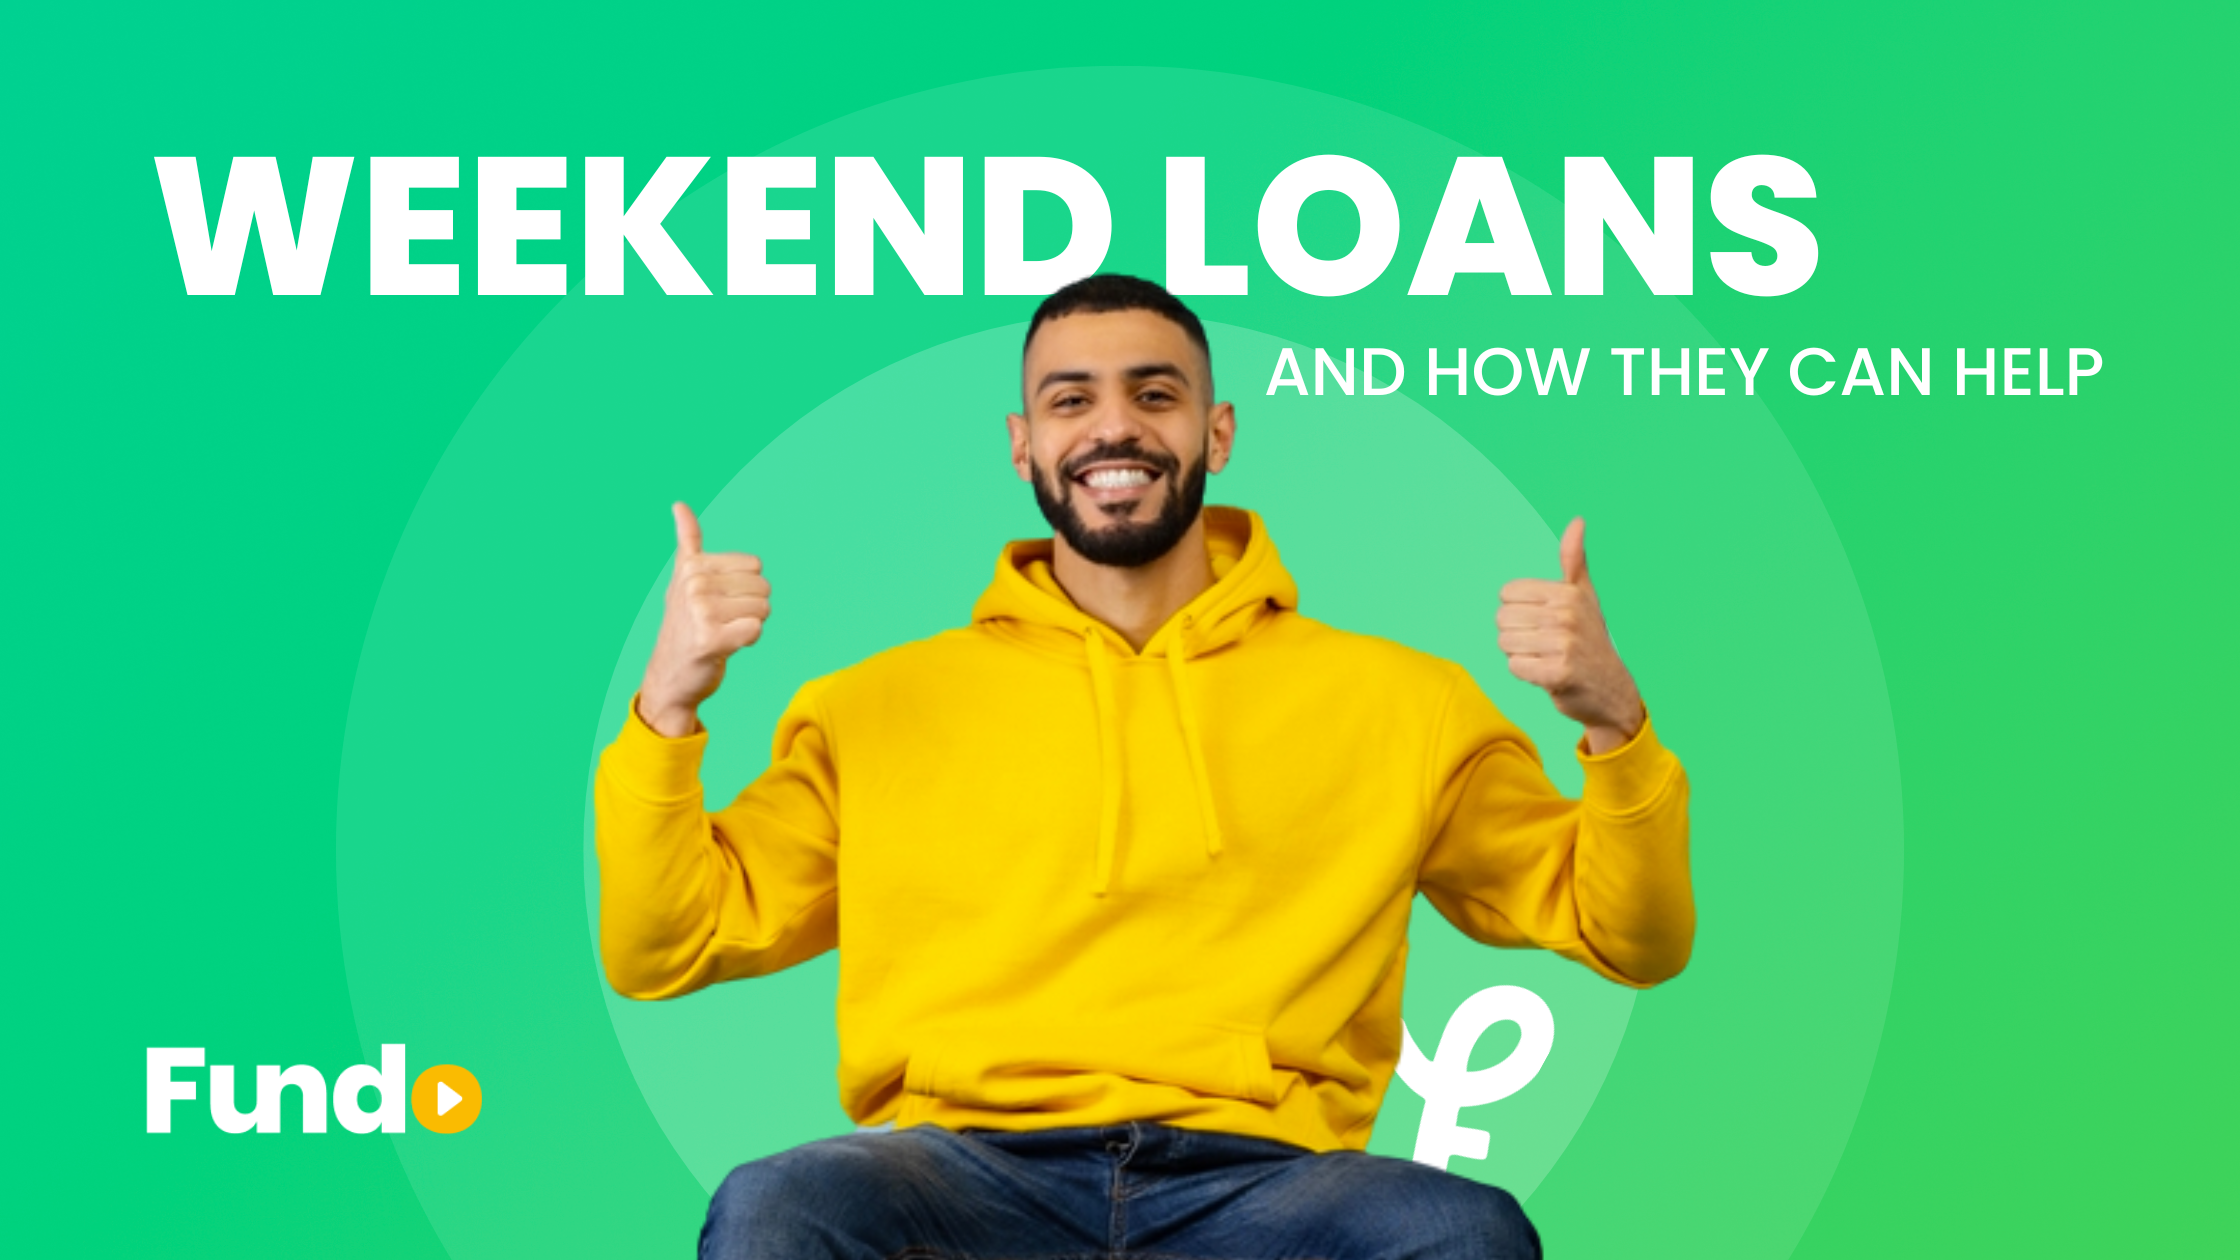 Weekend Loans and how they can help